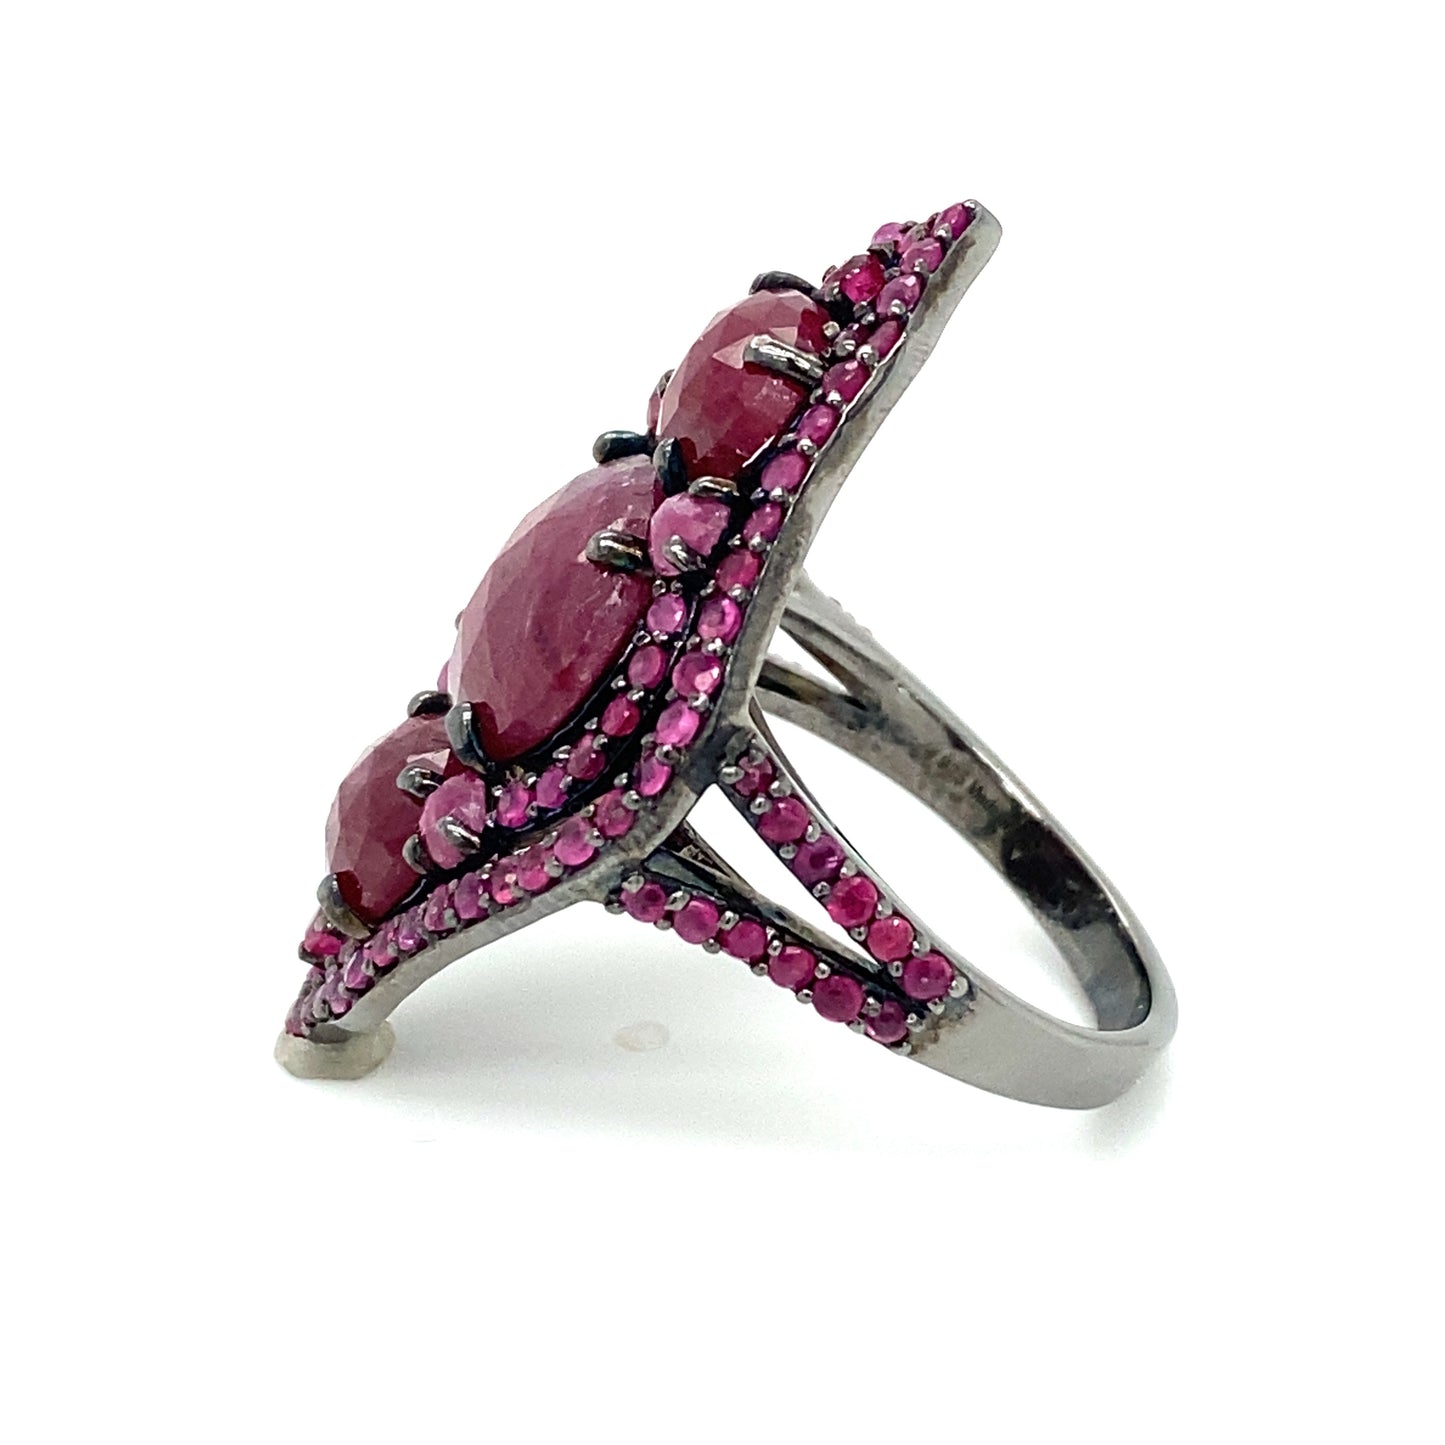 Circa 2000s 5.0 CTW Ruby Cocktail Ring in Black Rhodium Sterling Silver